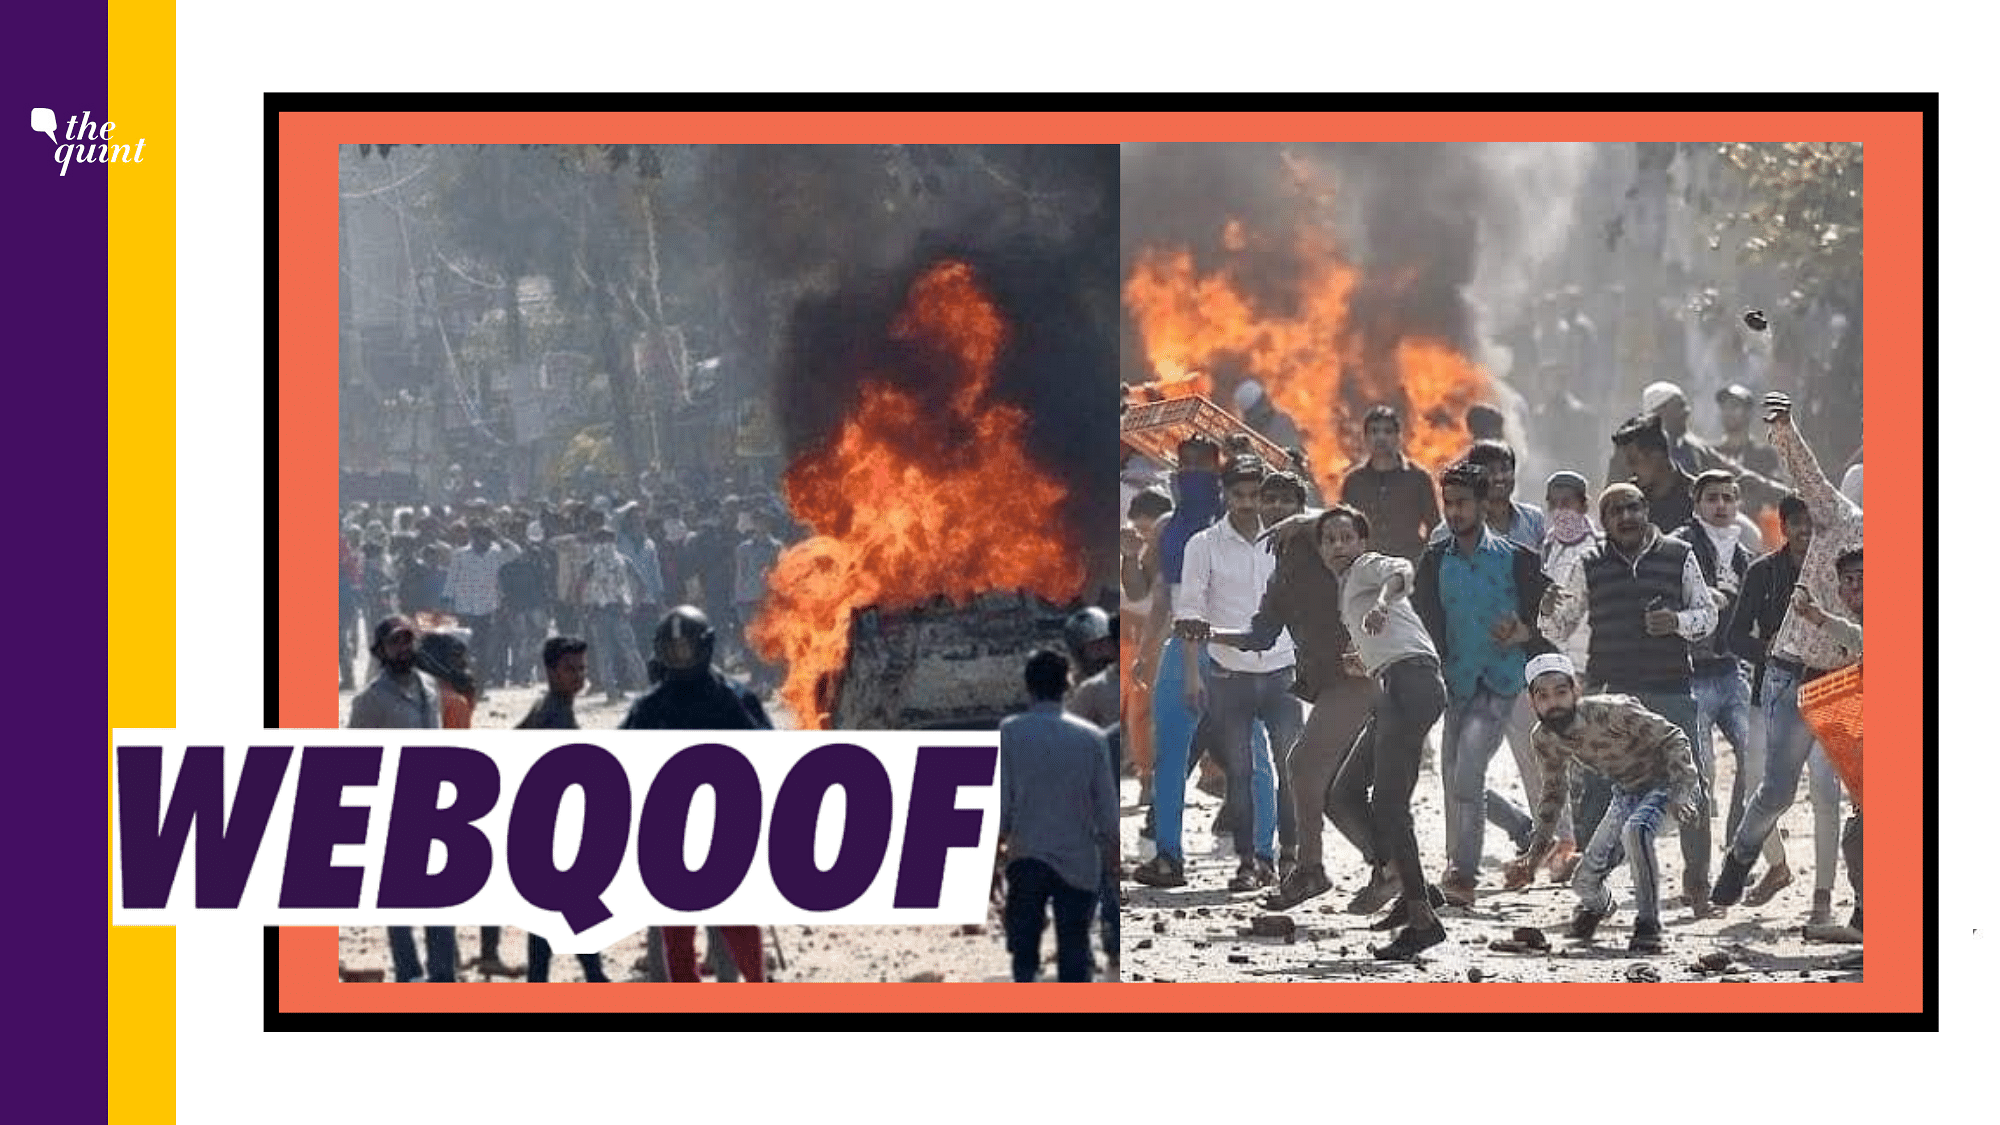 The images shared as violence in Bengaluru are actually old and from the northeast Delhi violence in February.